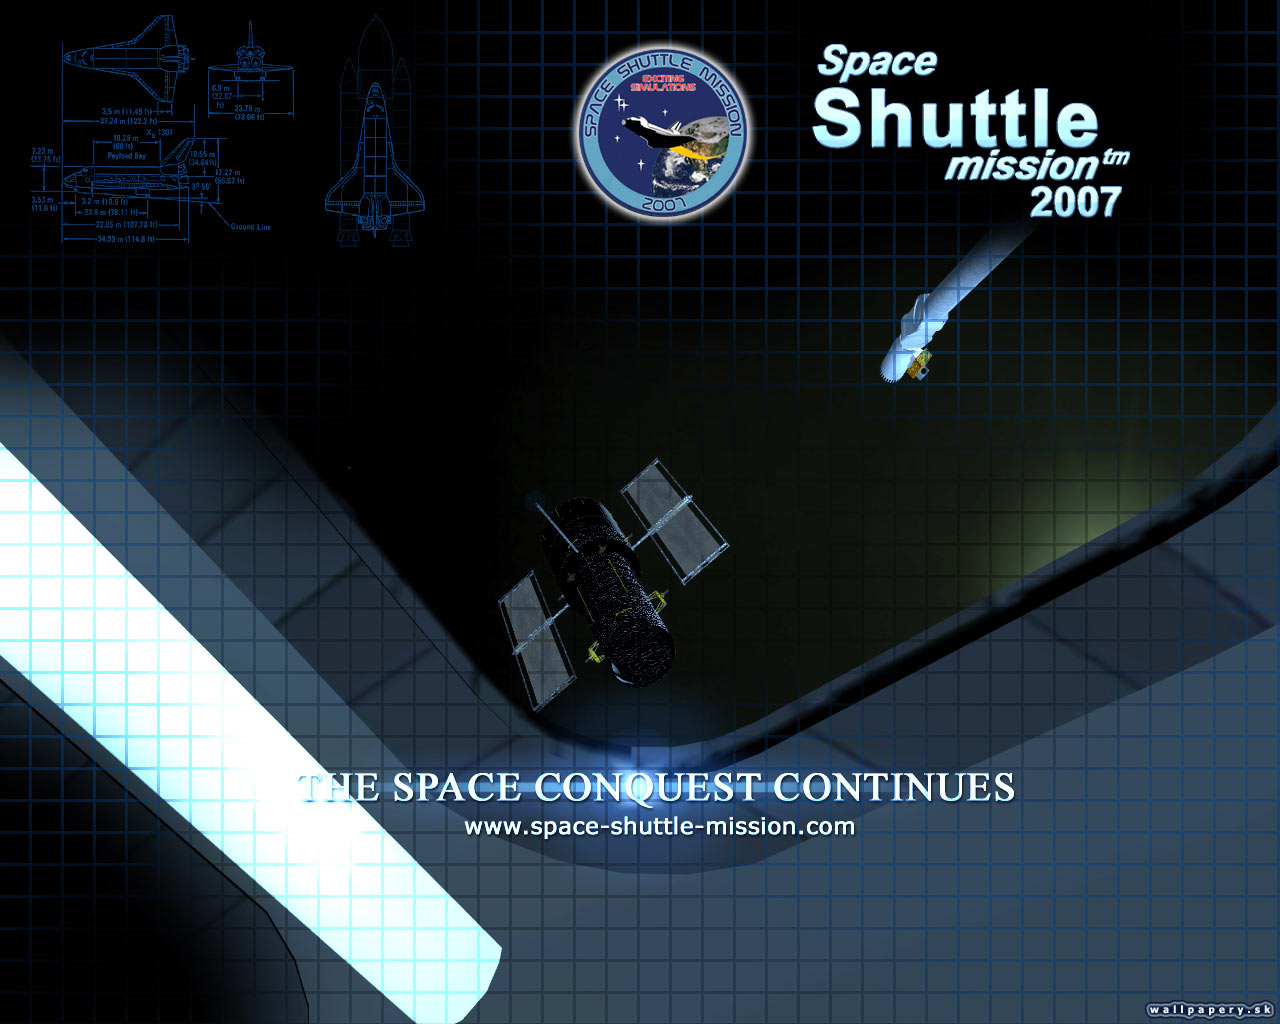 Space Shuttle Mission 2007 - wallpaper 6